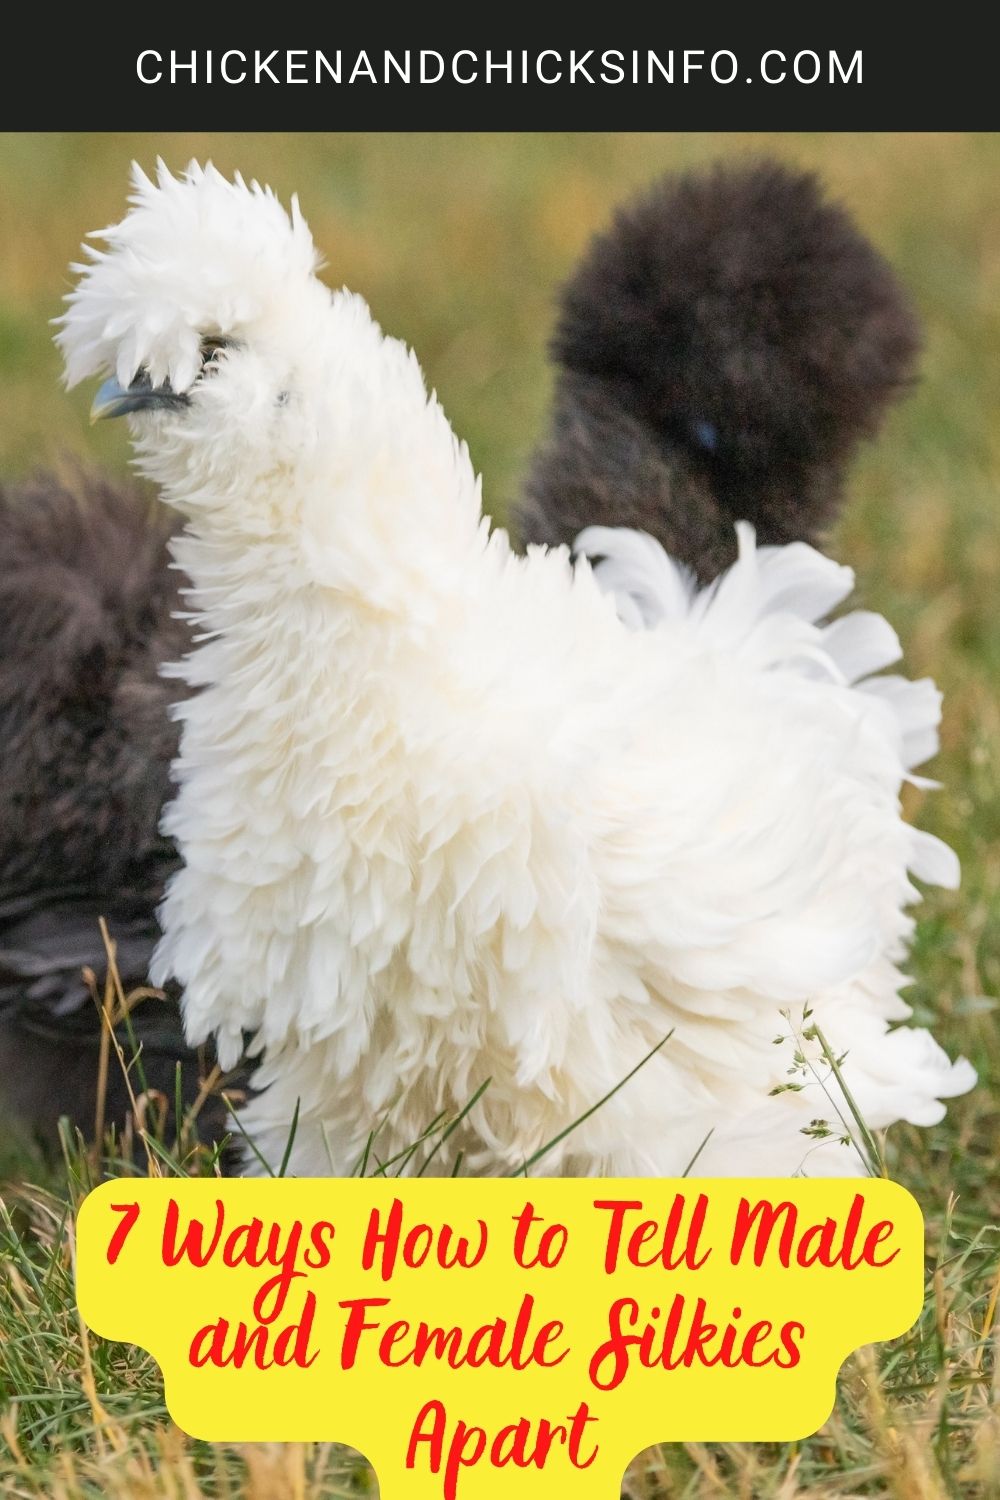 7 Ways How to Tell Male and Female Silkies Apart poster.
